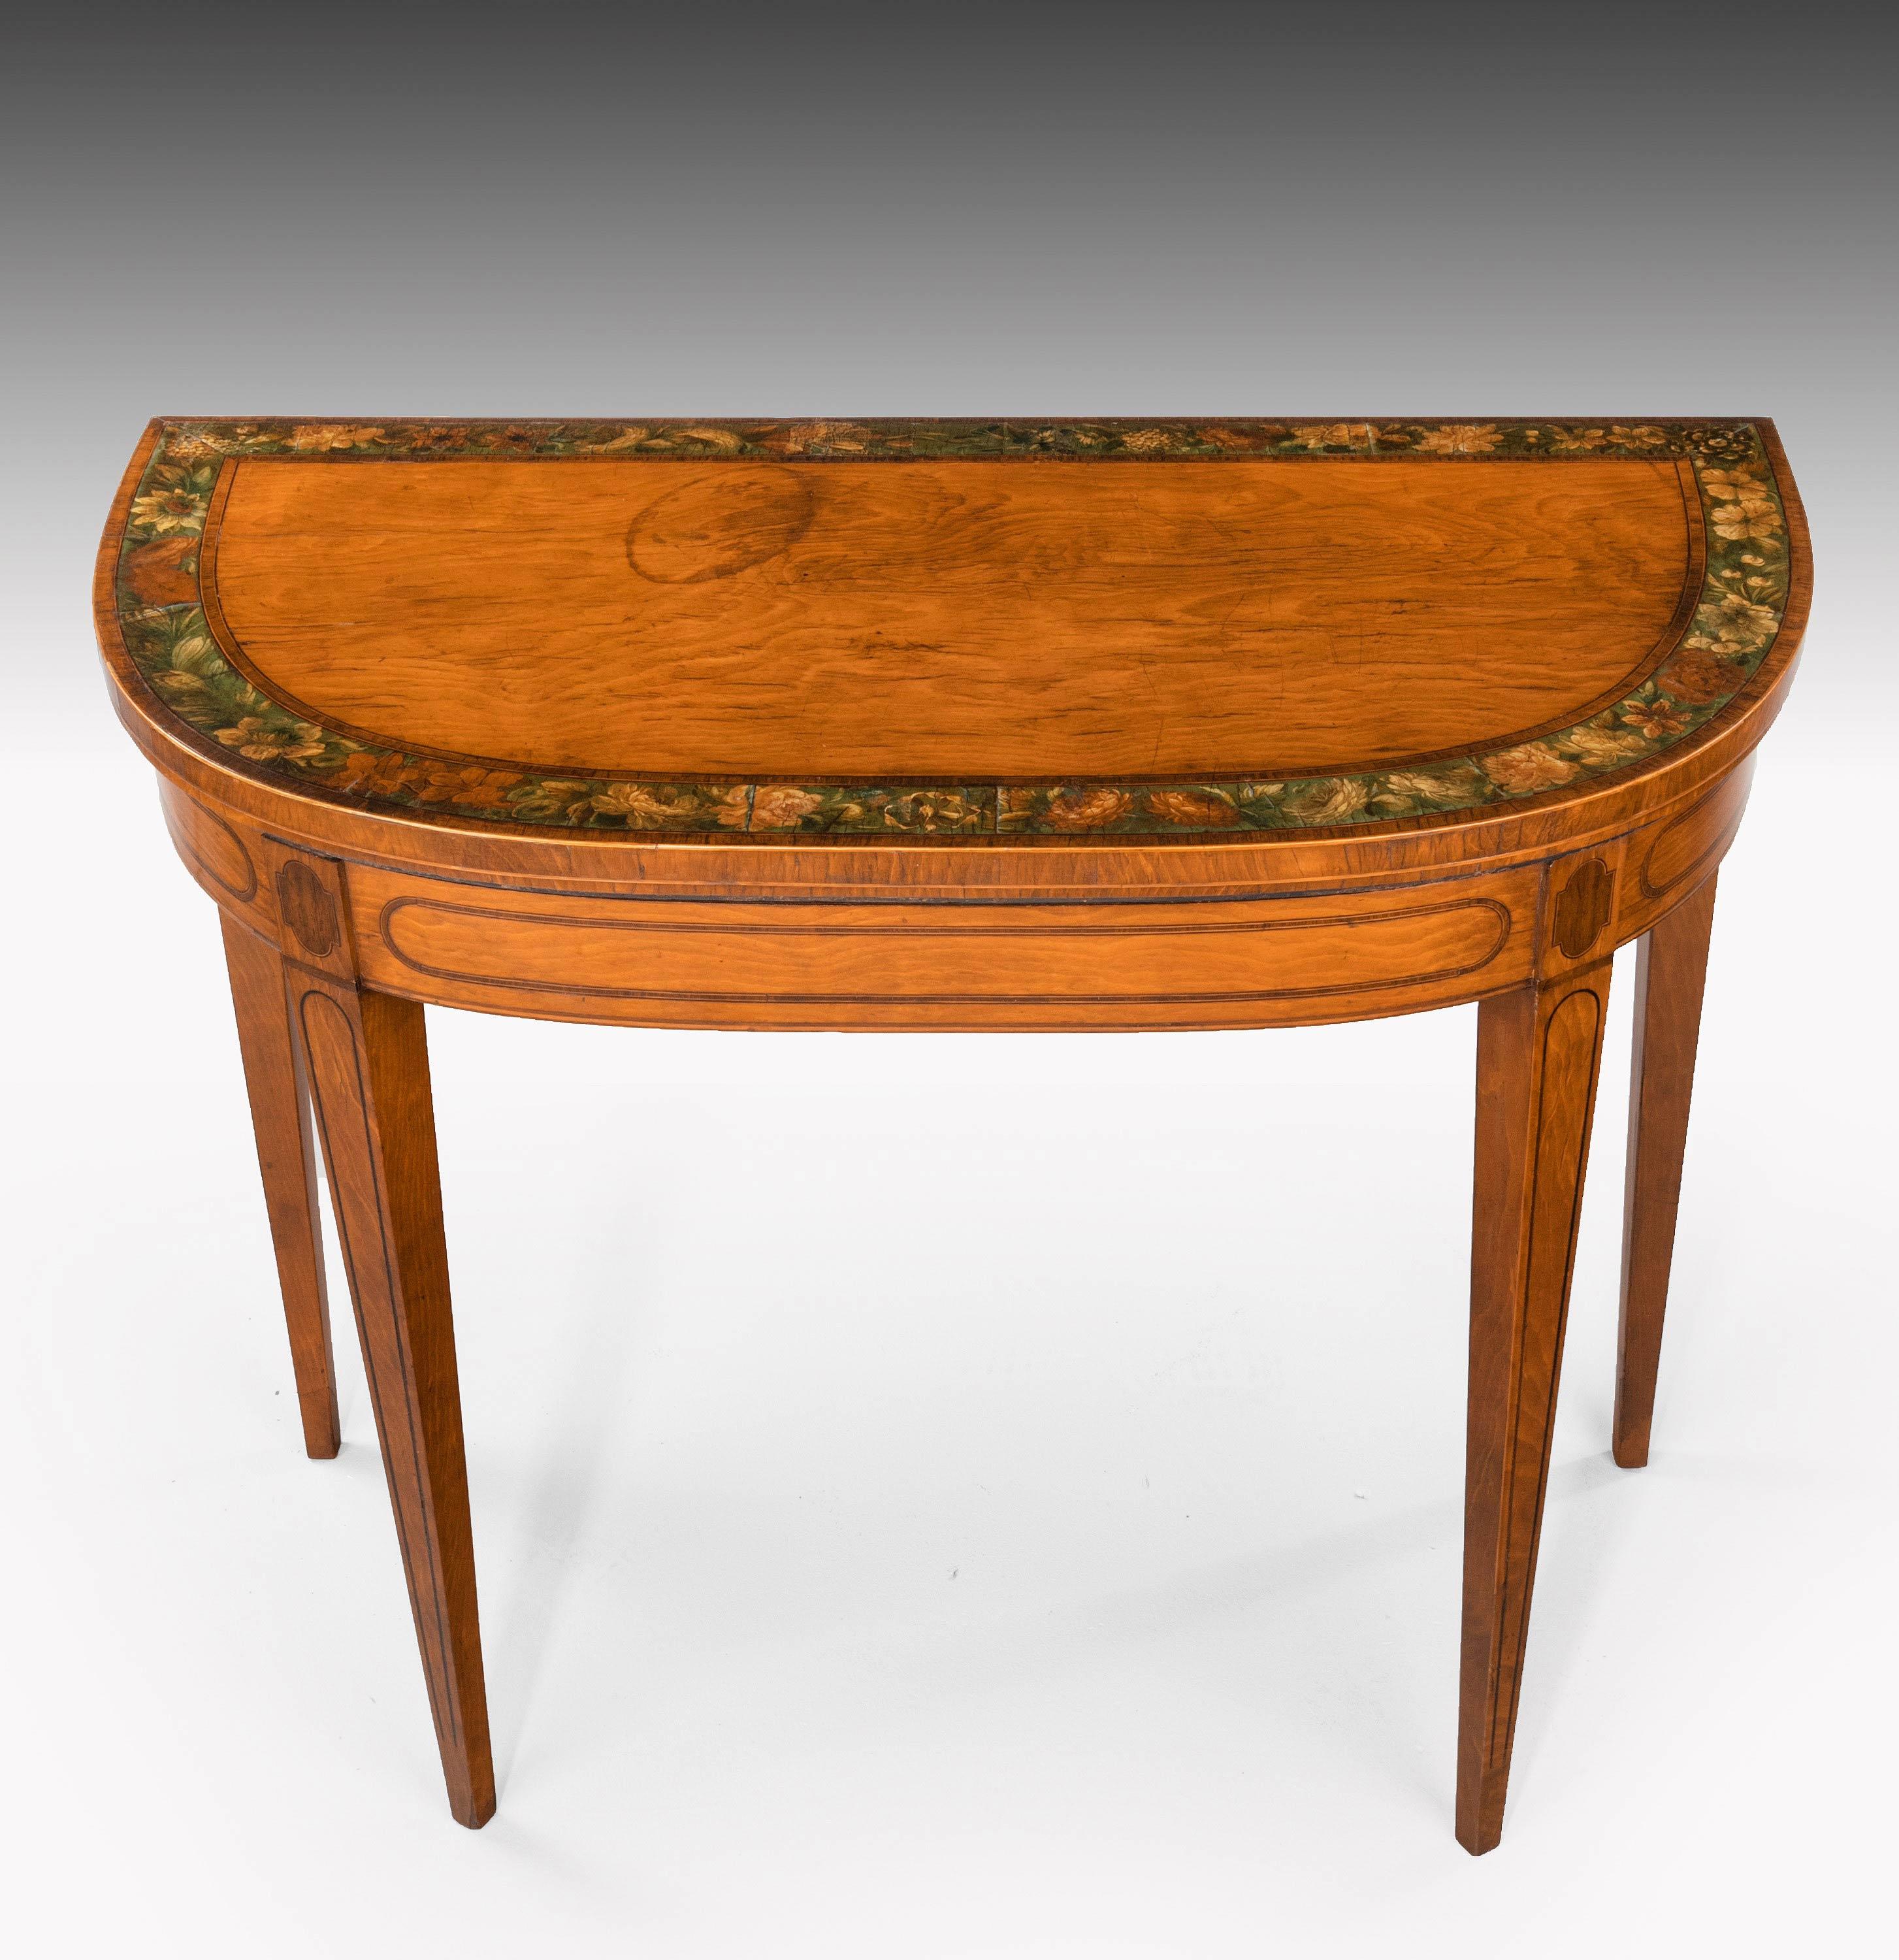 George III Period D-Shaped Satinwood Card Table In Excellent Condition For Sale In Peterborough, Northamptonshire